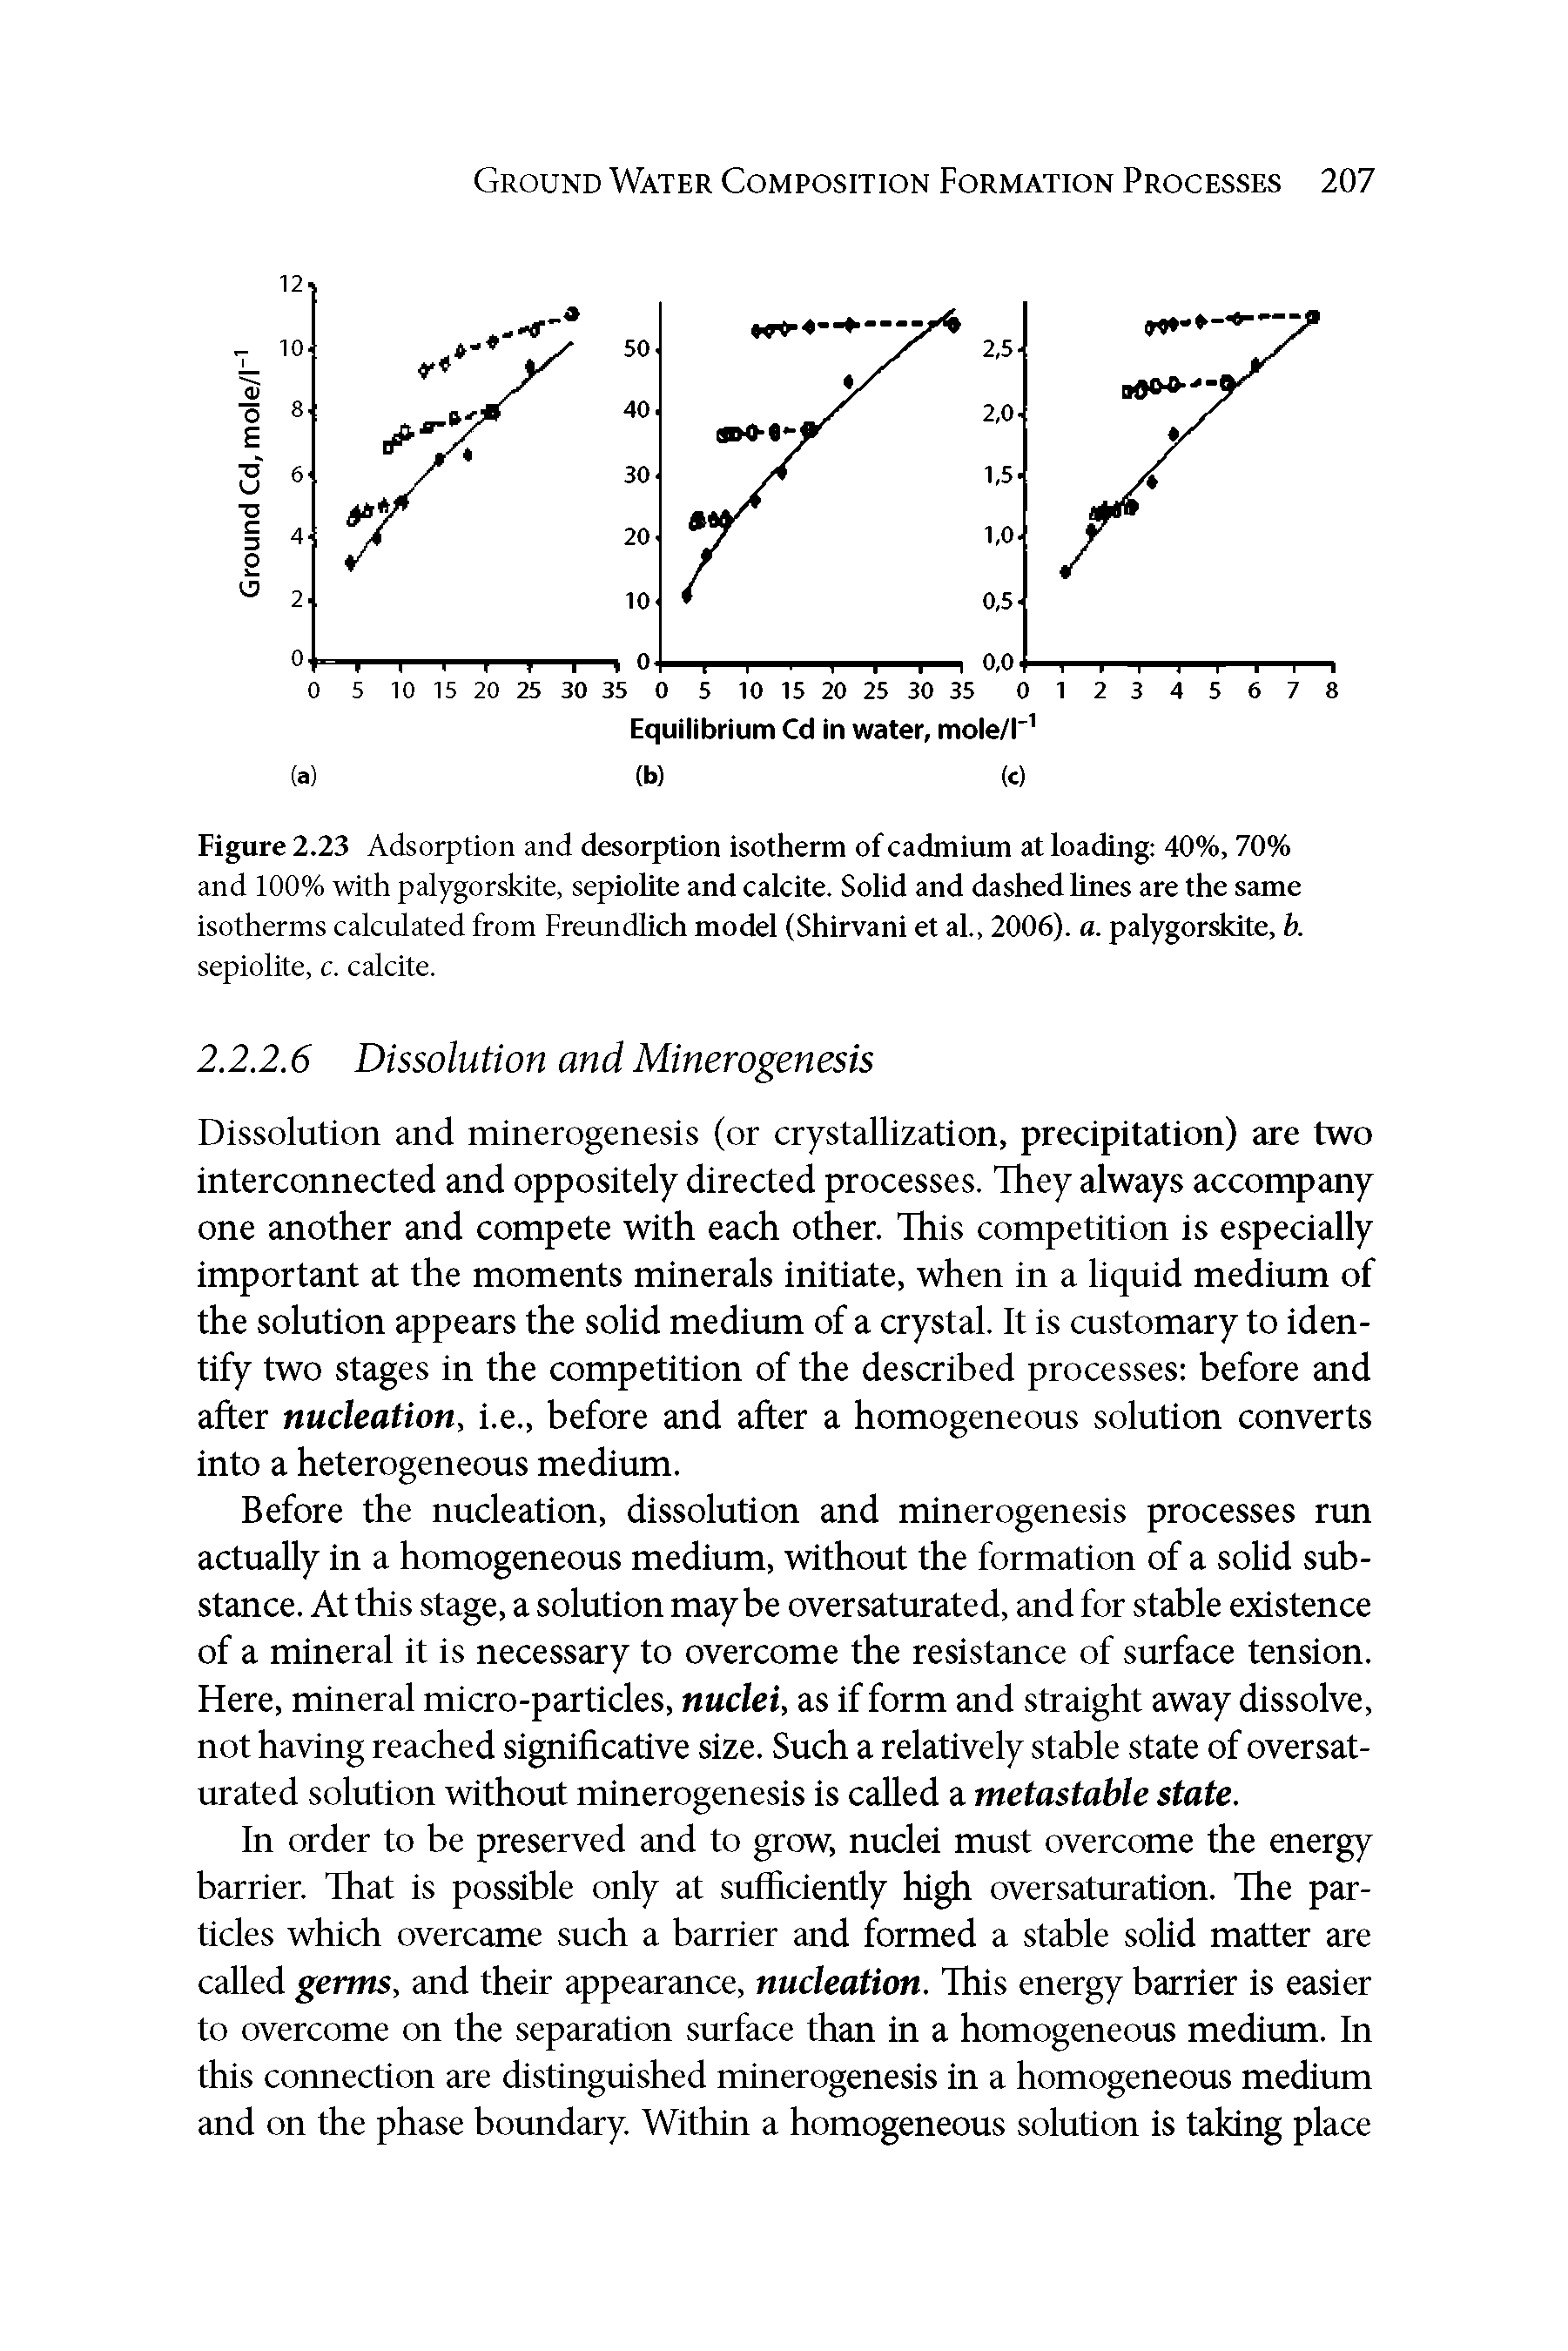 Figure 2.23 Adsorption and desorption isotherm of cadmium at loading 40%, 70% and 100% with palygorskite, sepiolite and calcite. Solid and dashed lines are the same isotherms calculated from Freundlich model (Shirvani et al, 2006). a. palygorskite, b. sepiolite, c. calcite.